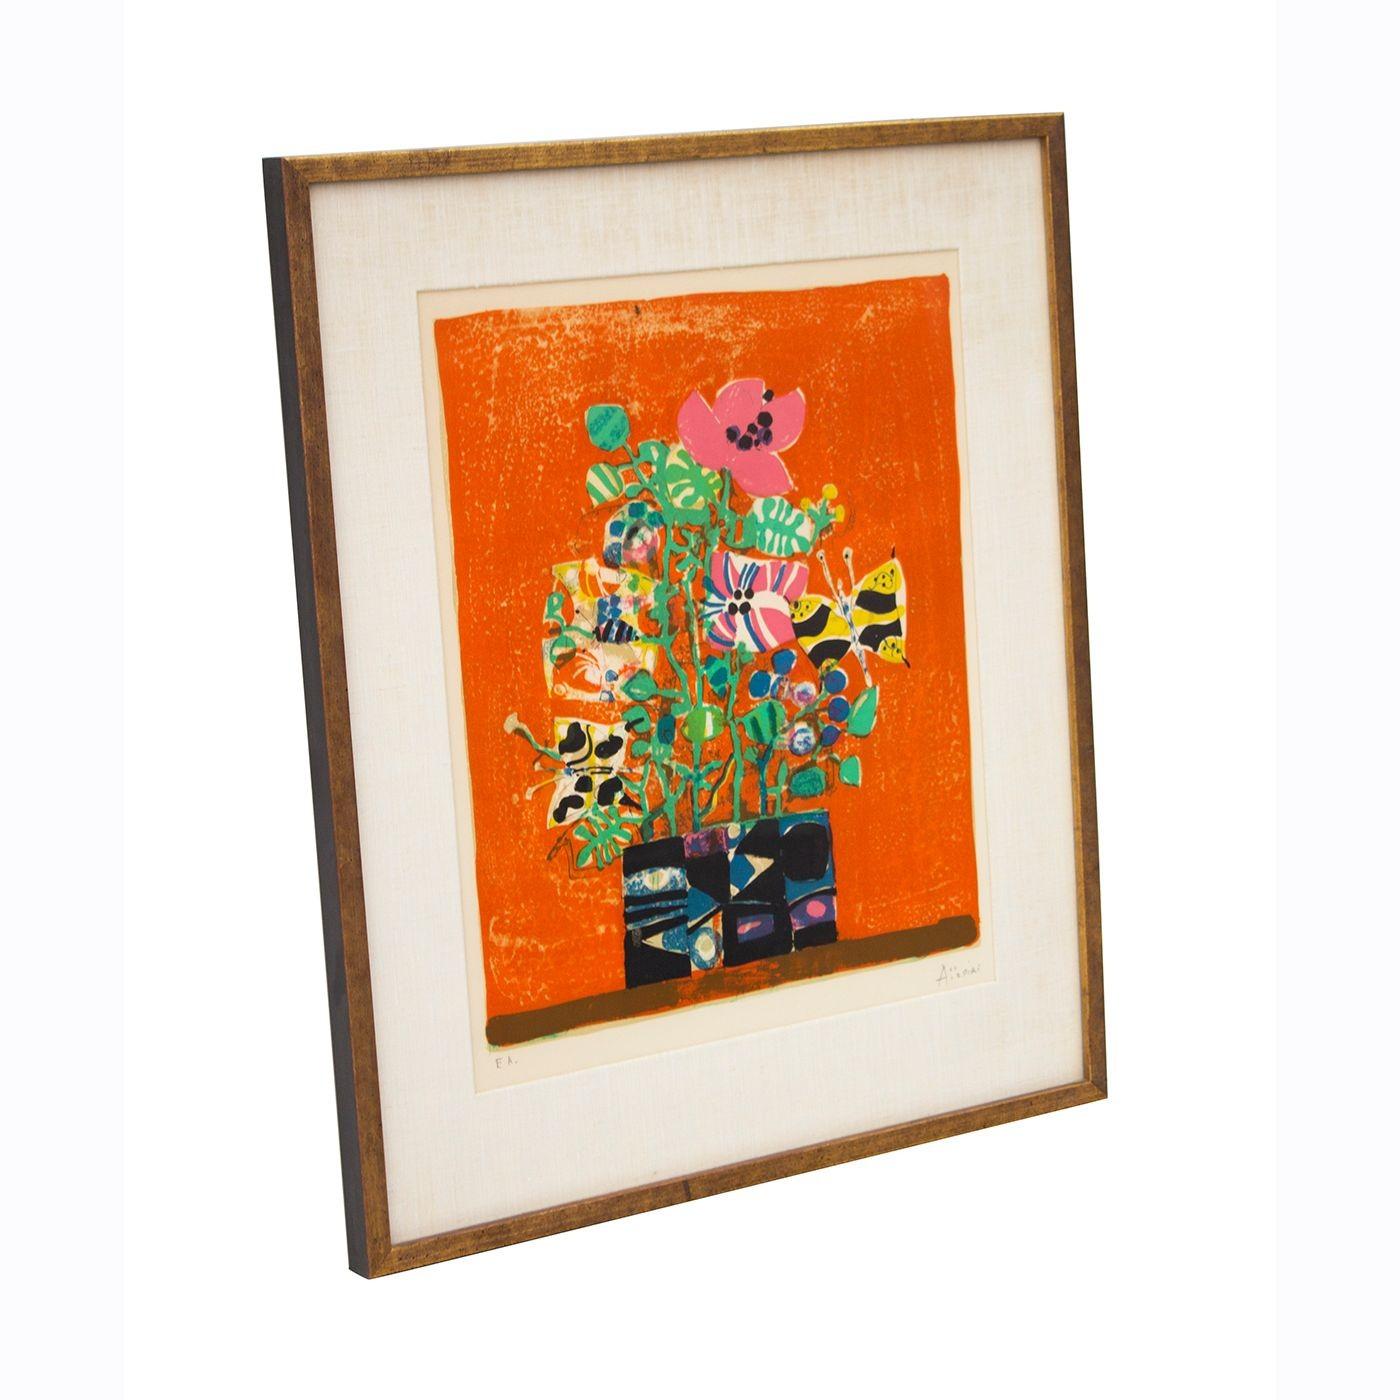 France, 1972
Paul Aizpiri (French, 1919-2016)
Original hand-signed color lithograph by Paul Aizpiri. This is a very nice floral still life in oranges and greens with a gilt frame and linen matte. Hand-signed in pencil by the artist at the lower